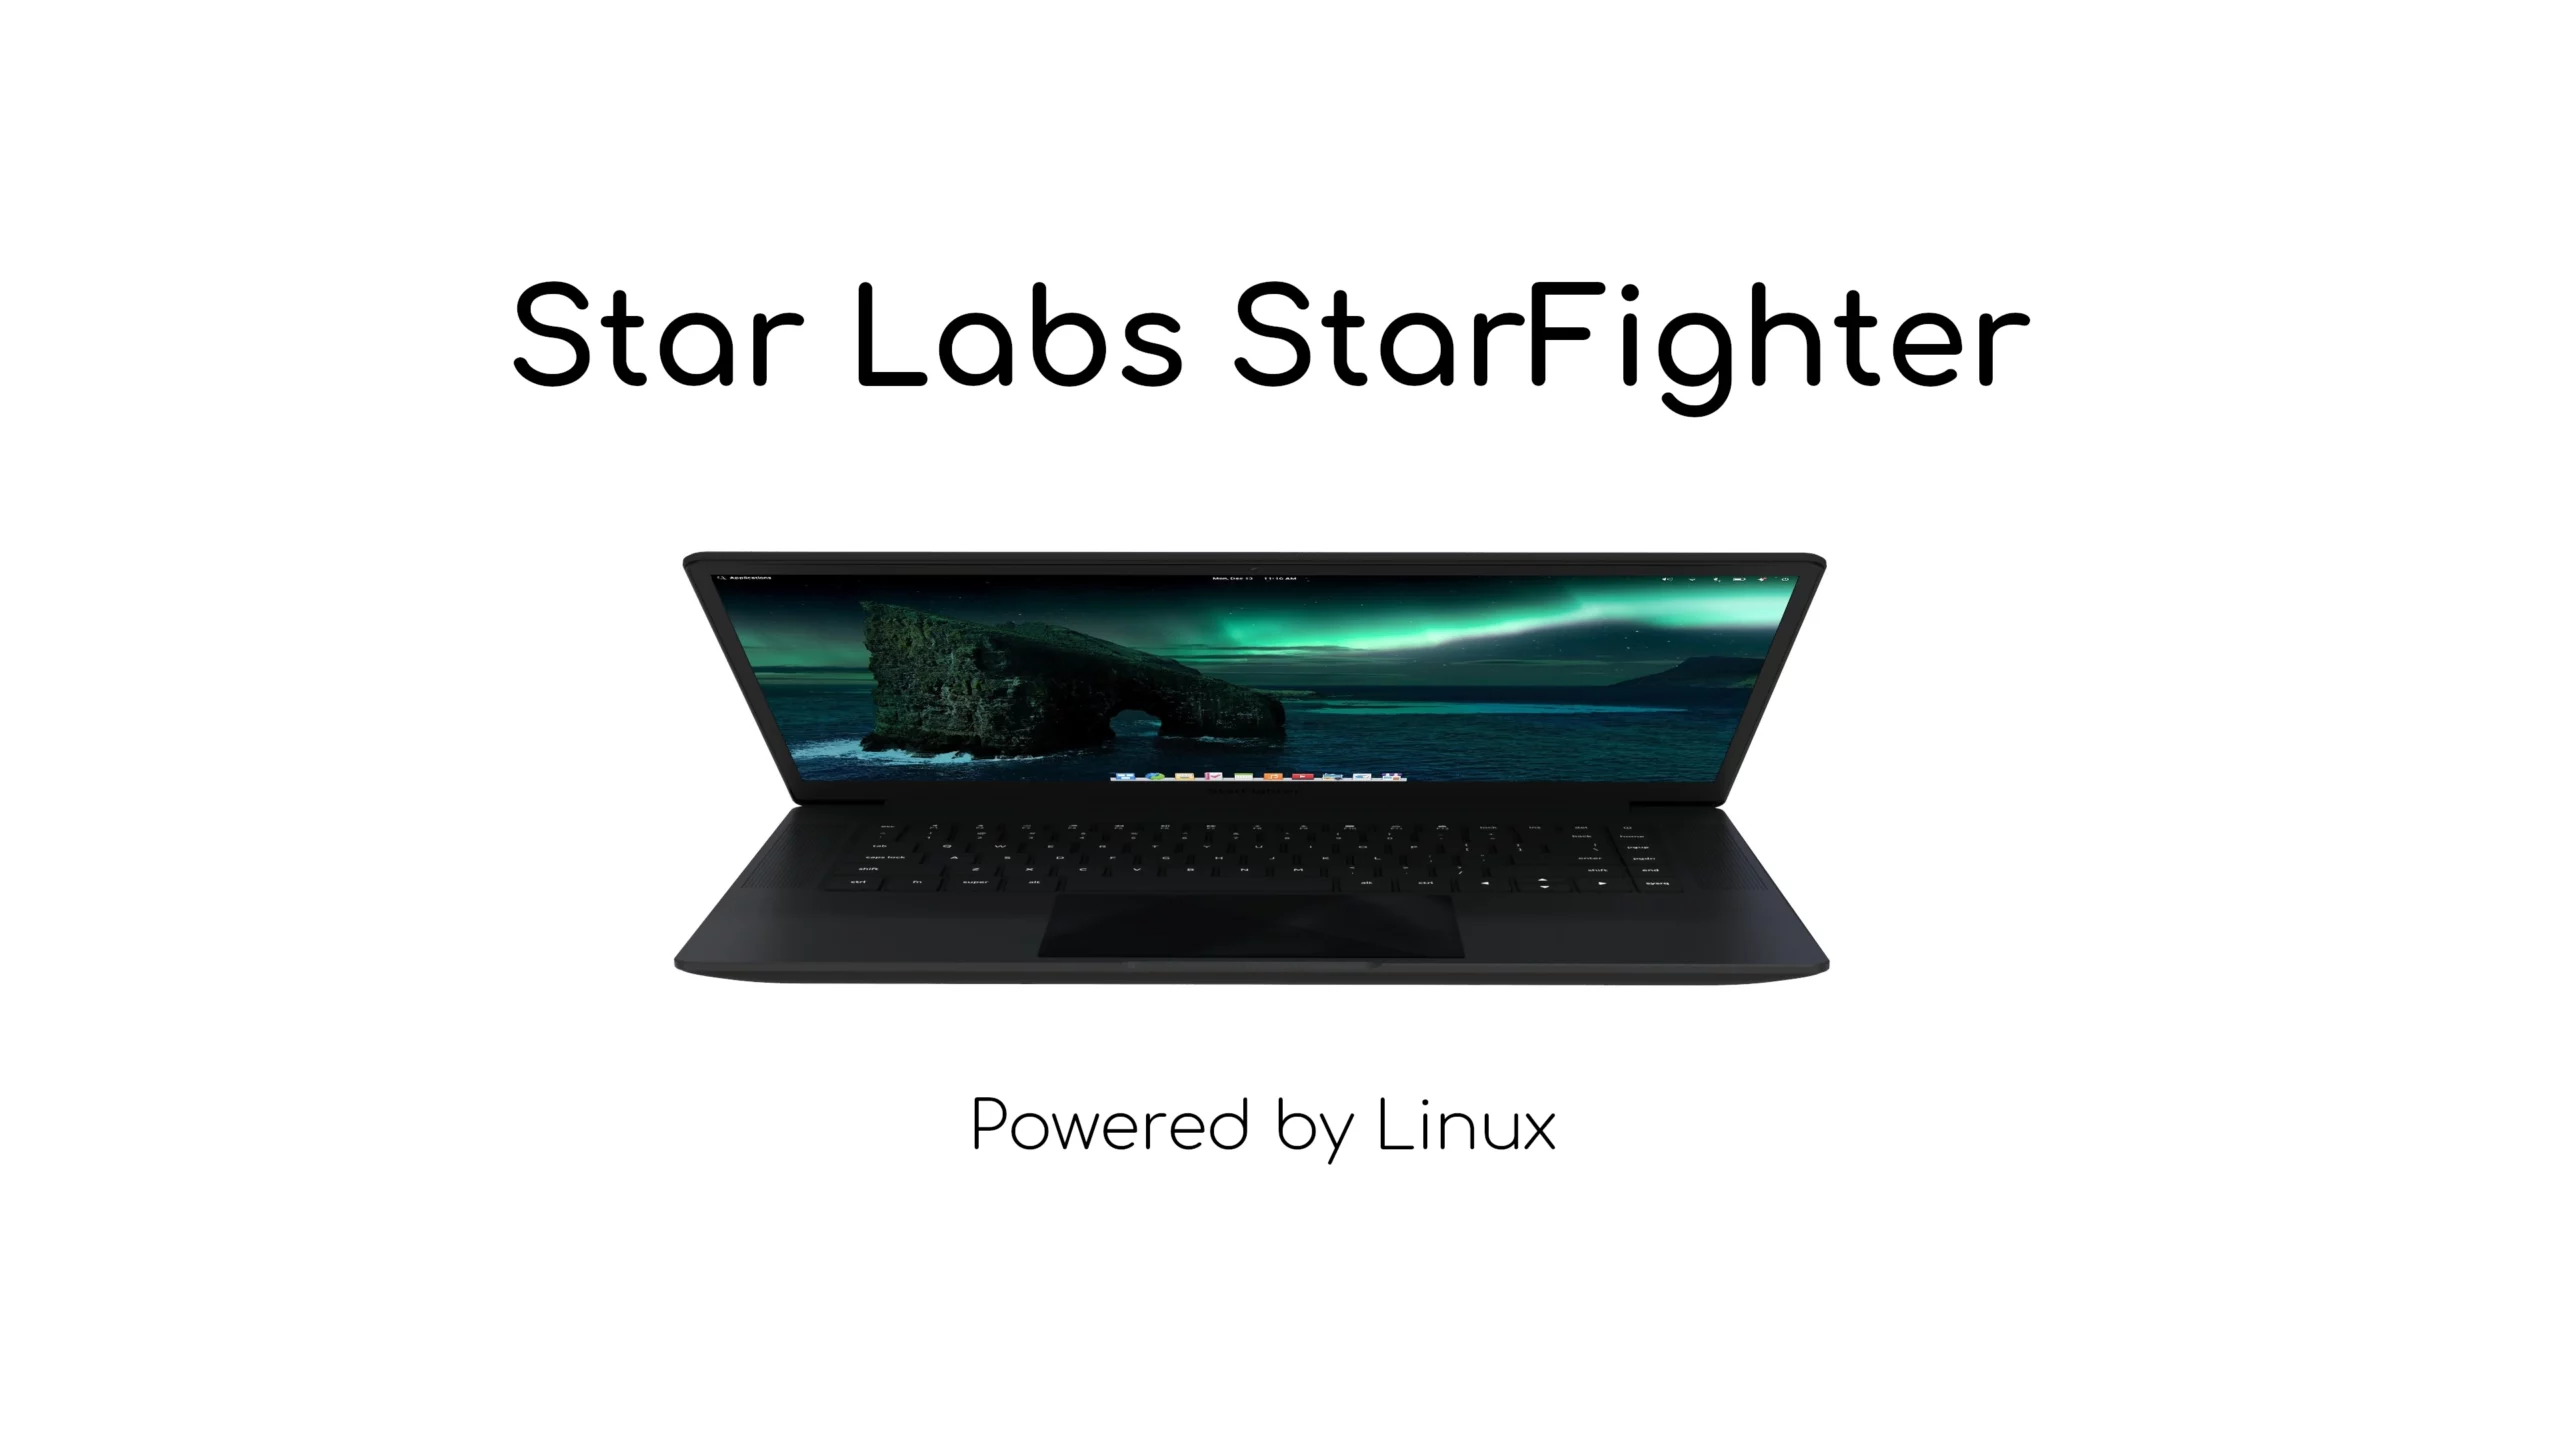 Star Labs Teases the StarFighter Linux Laptop with 4K Display, AMD or Intel Processors